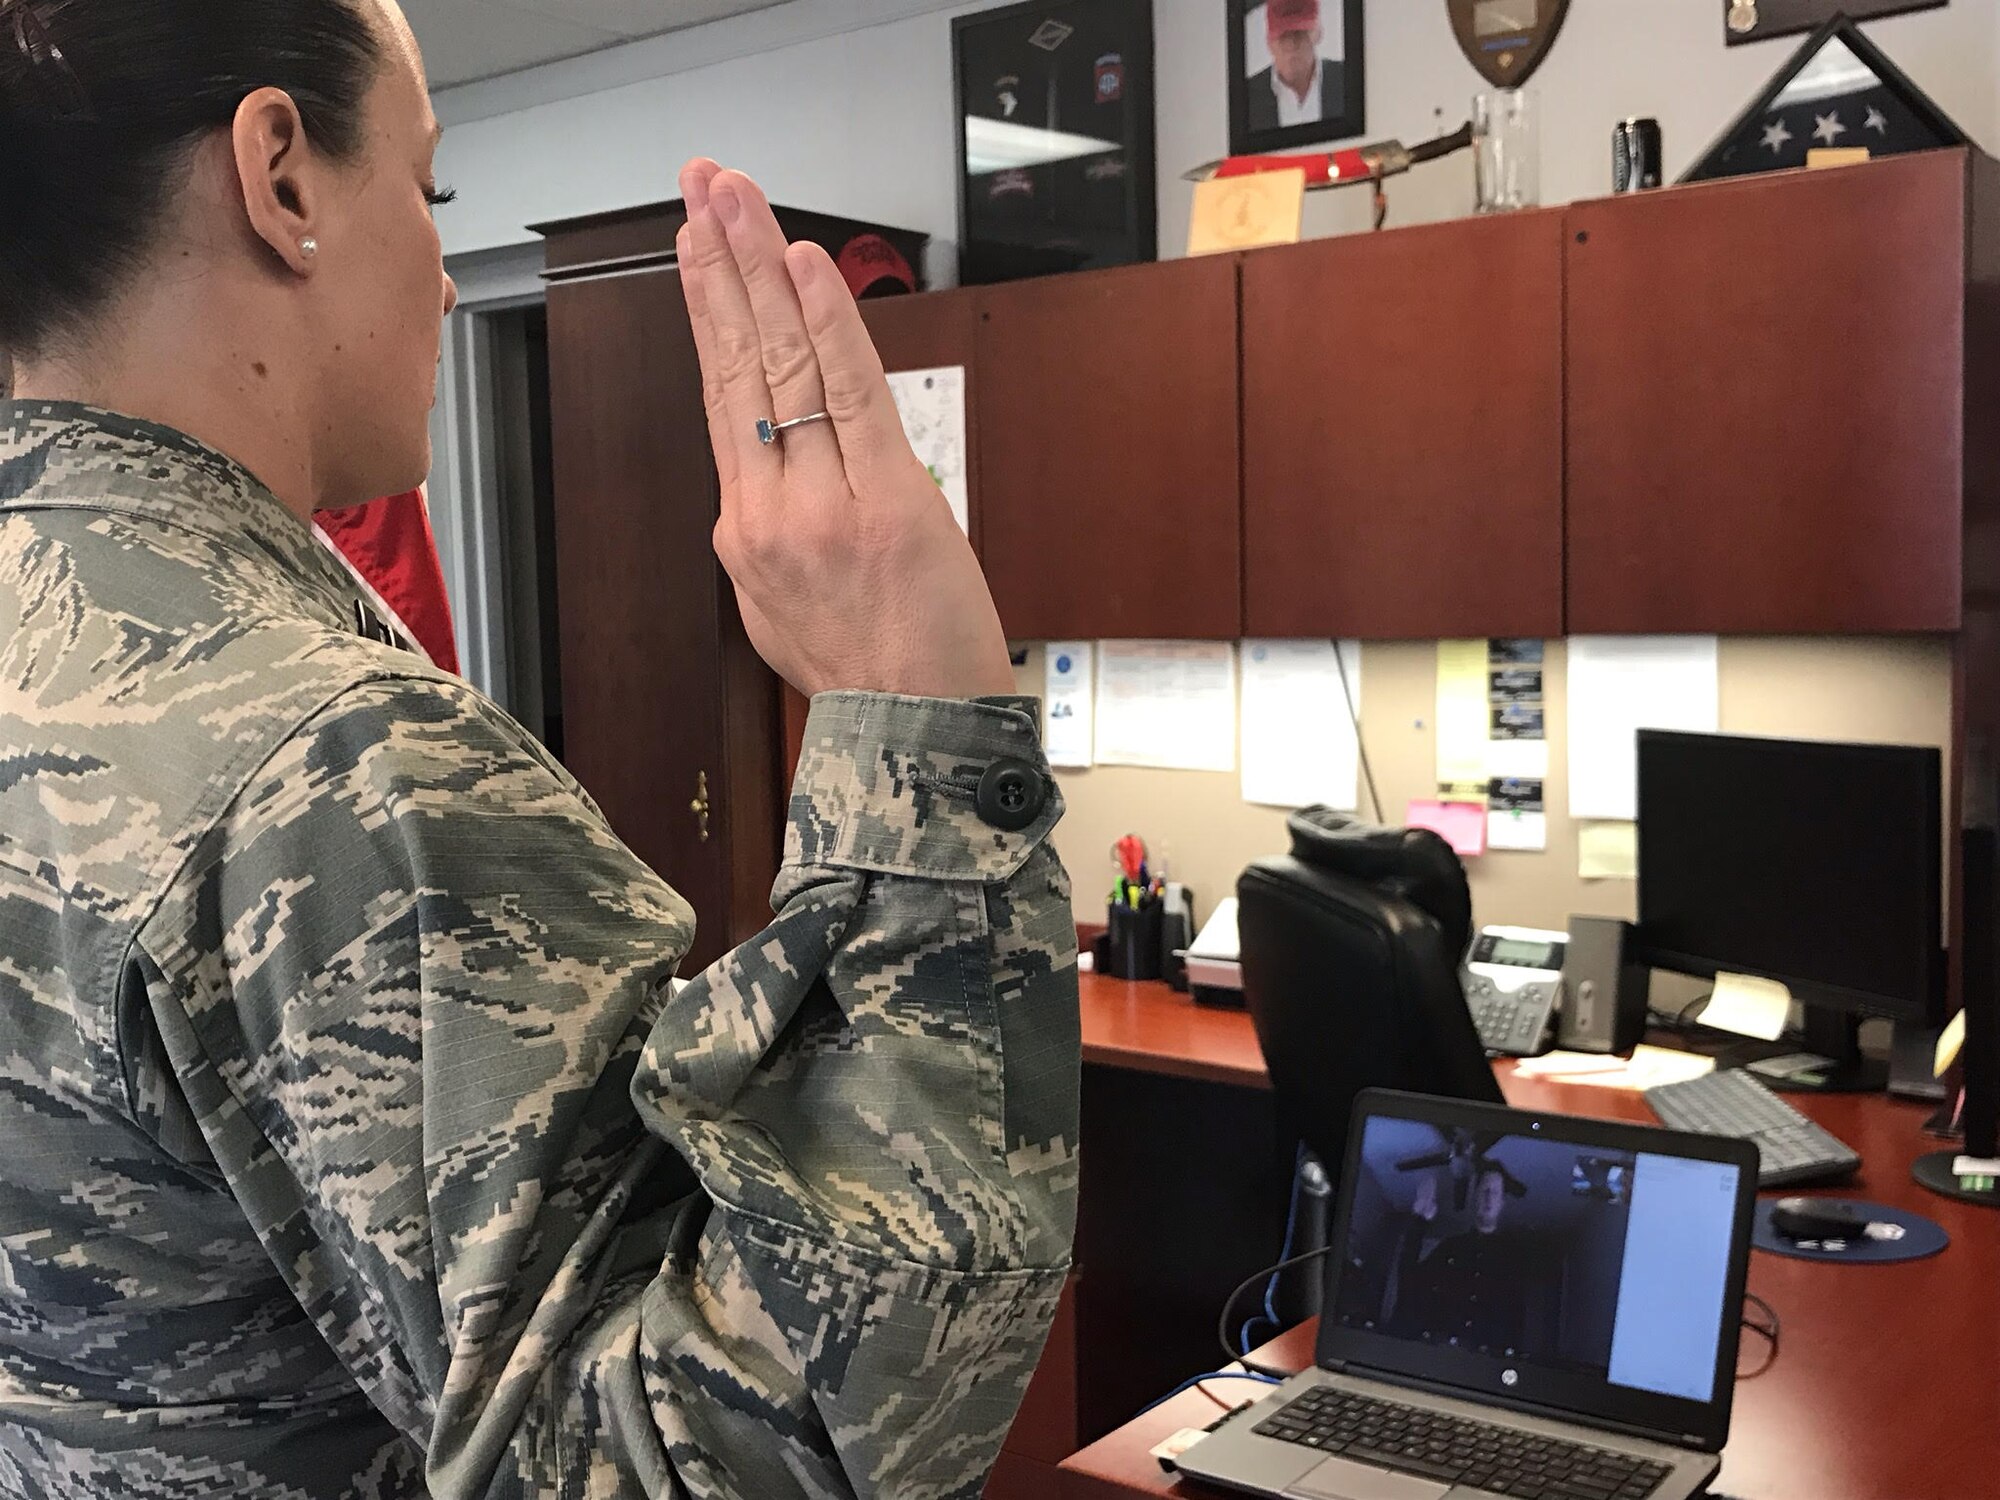 Capt. Vallaree McArthur conducts a virtual enlistment ceremony for Brendan Frazer, who recently signed up to serve as a Cyber Warfare Journeyman